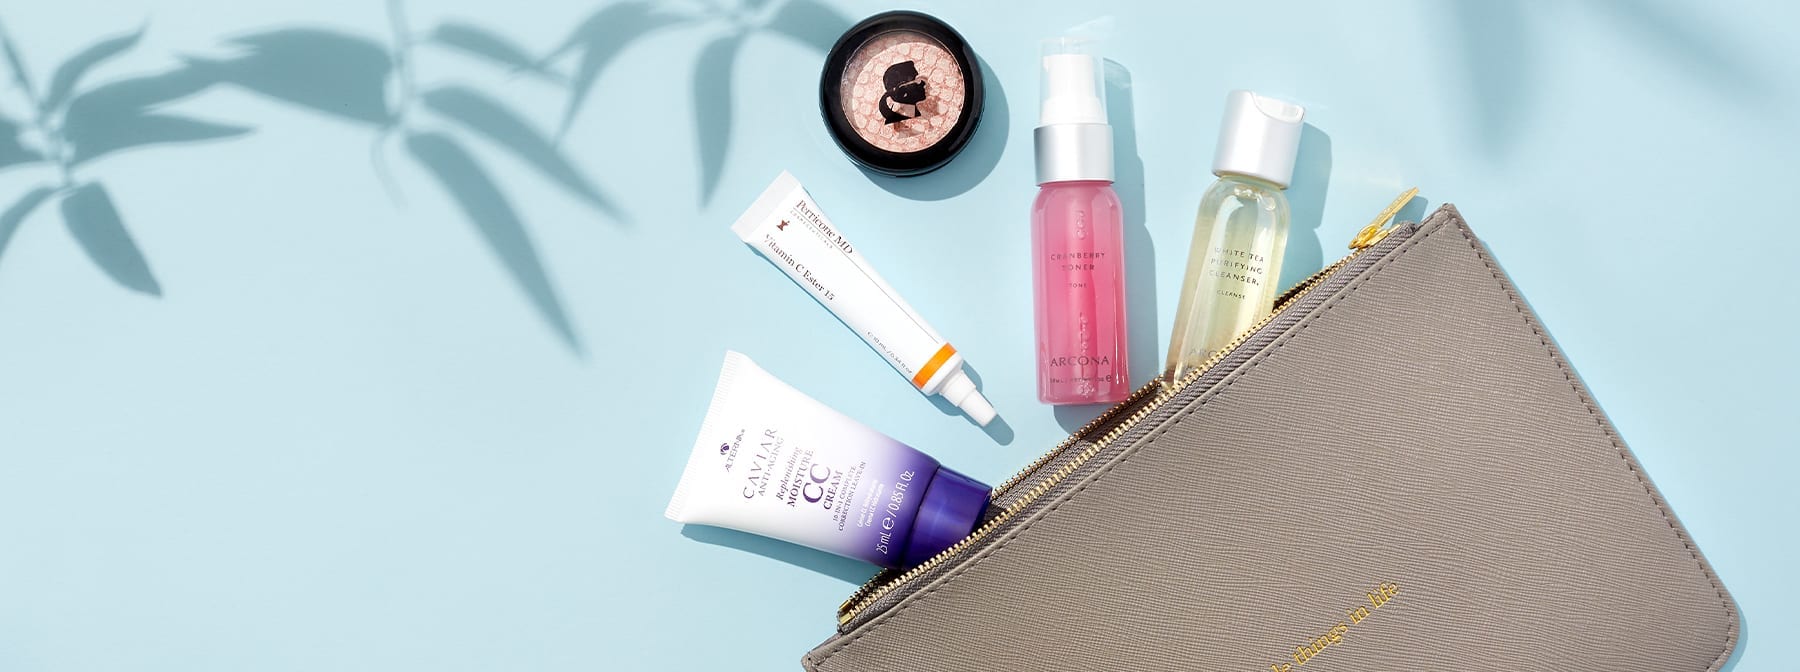 What’s In Our Beauty Bag This Month